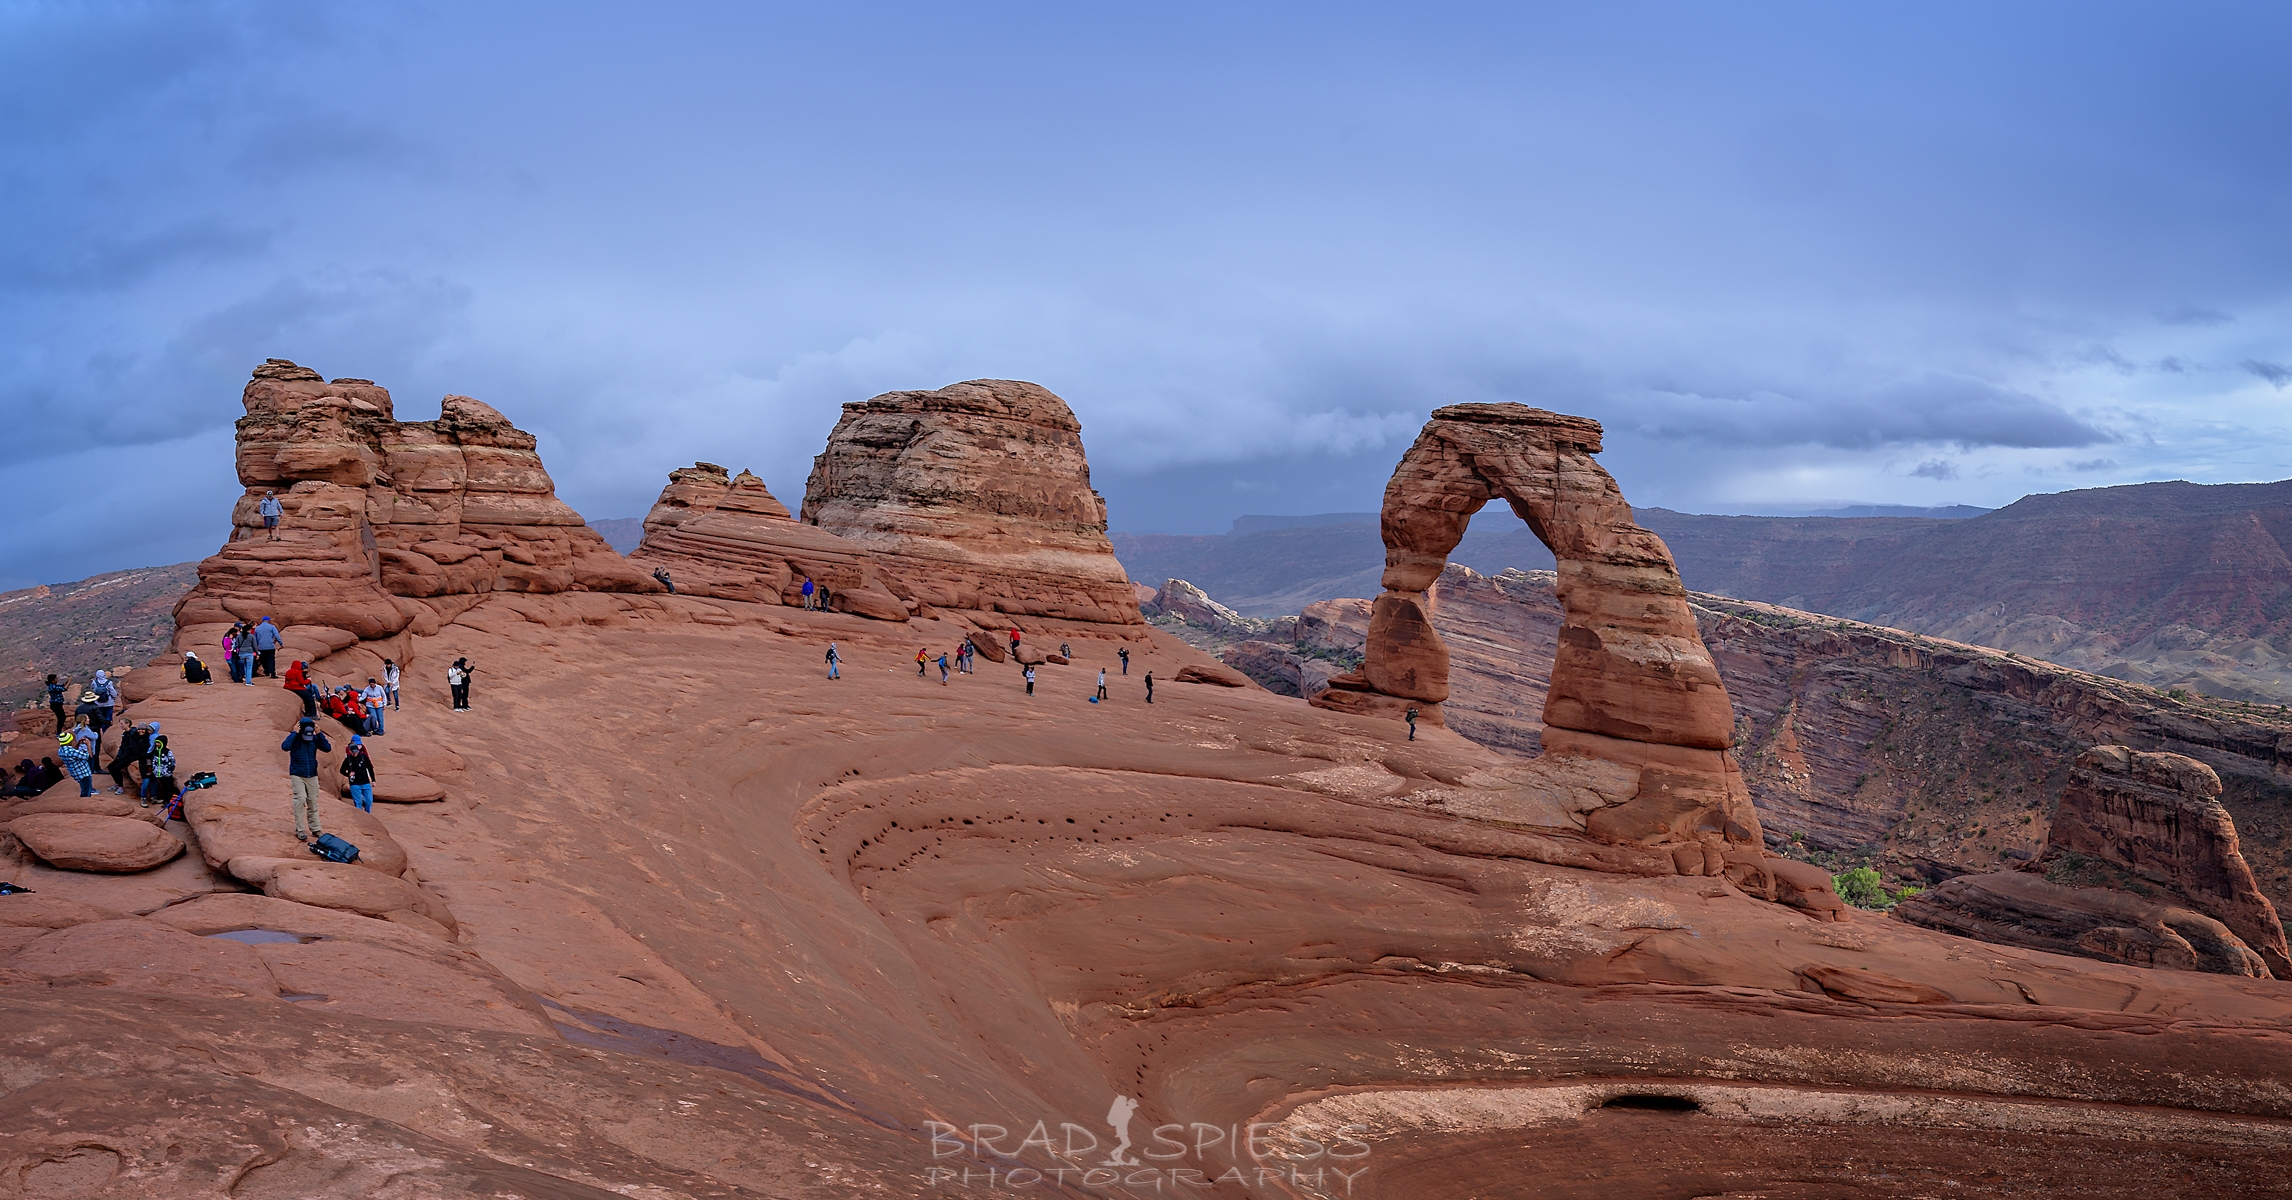 The crowds of people at Delicate Arch in Arches National Park